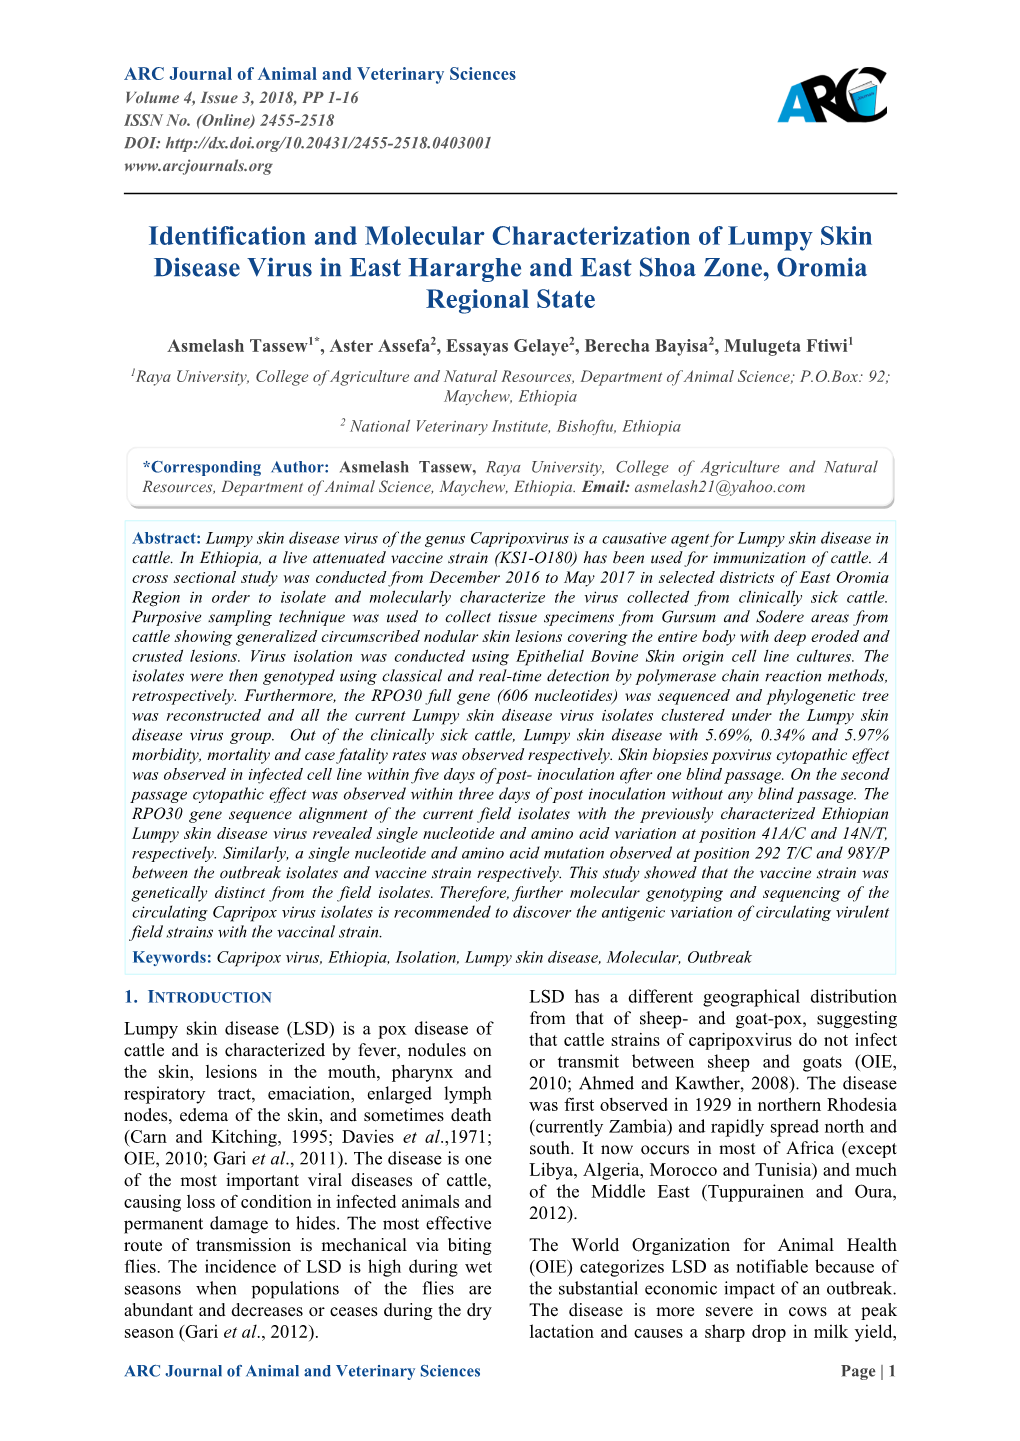 Identification and Molecular Characterization of Lumpy Skin Disease Virus in East Hararghe and East Shoa Zone, Oromia Regional State